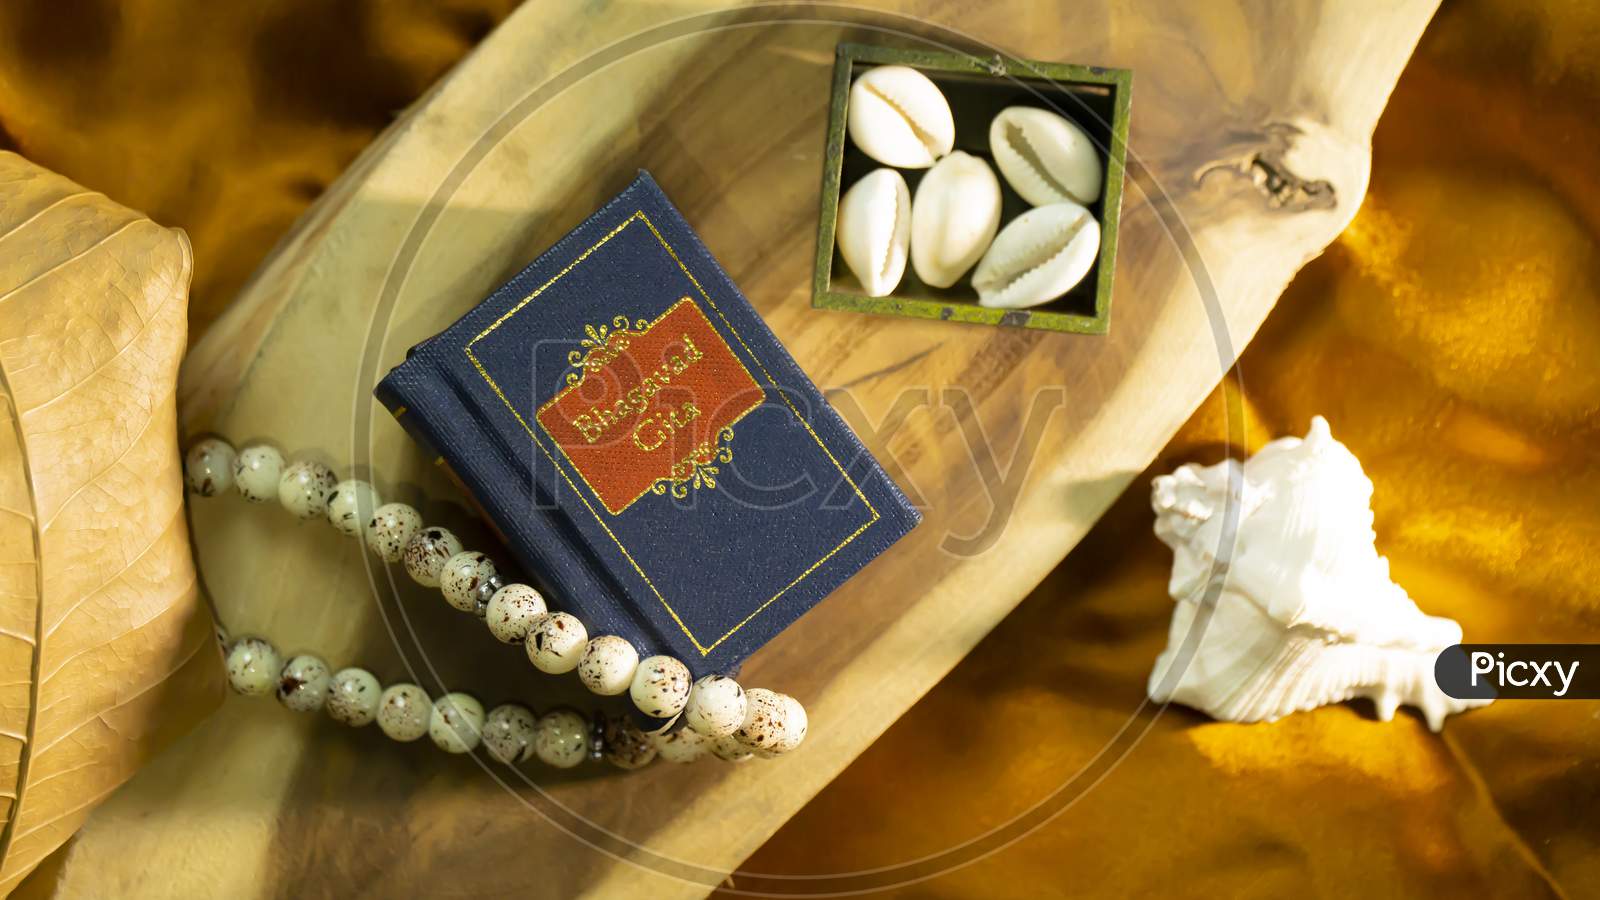 Hindu holy book and cowrie shell on a golden satin cloth with other elements of religious rituals